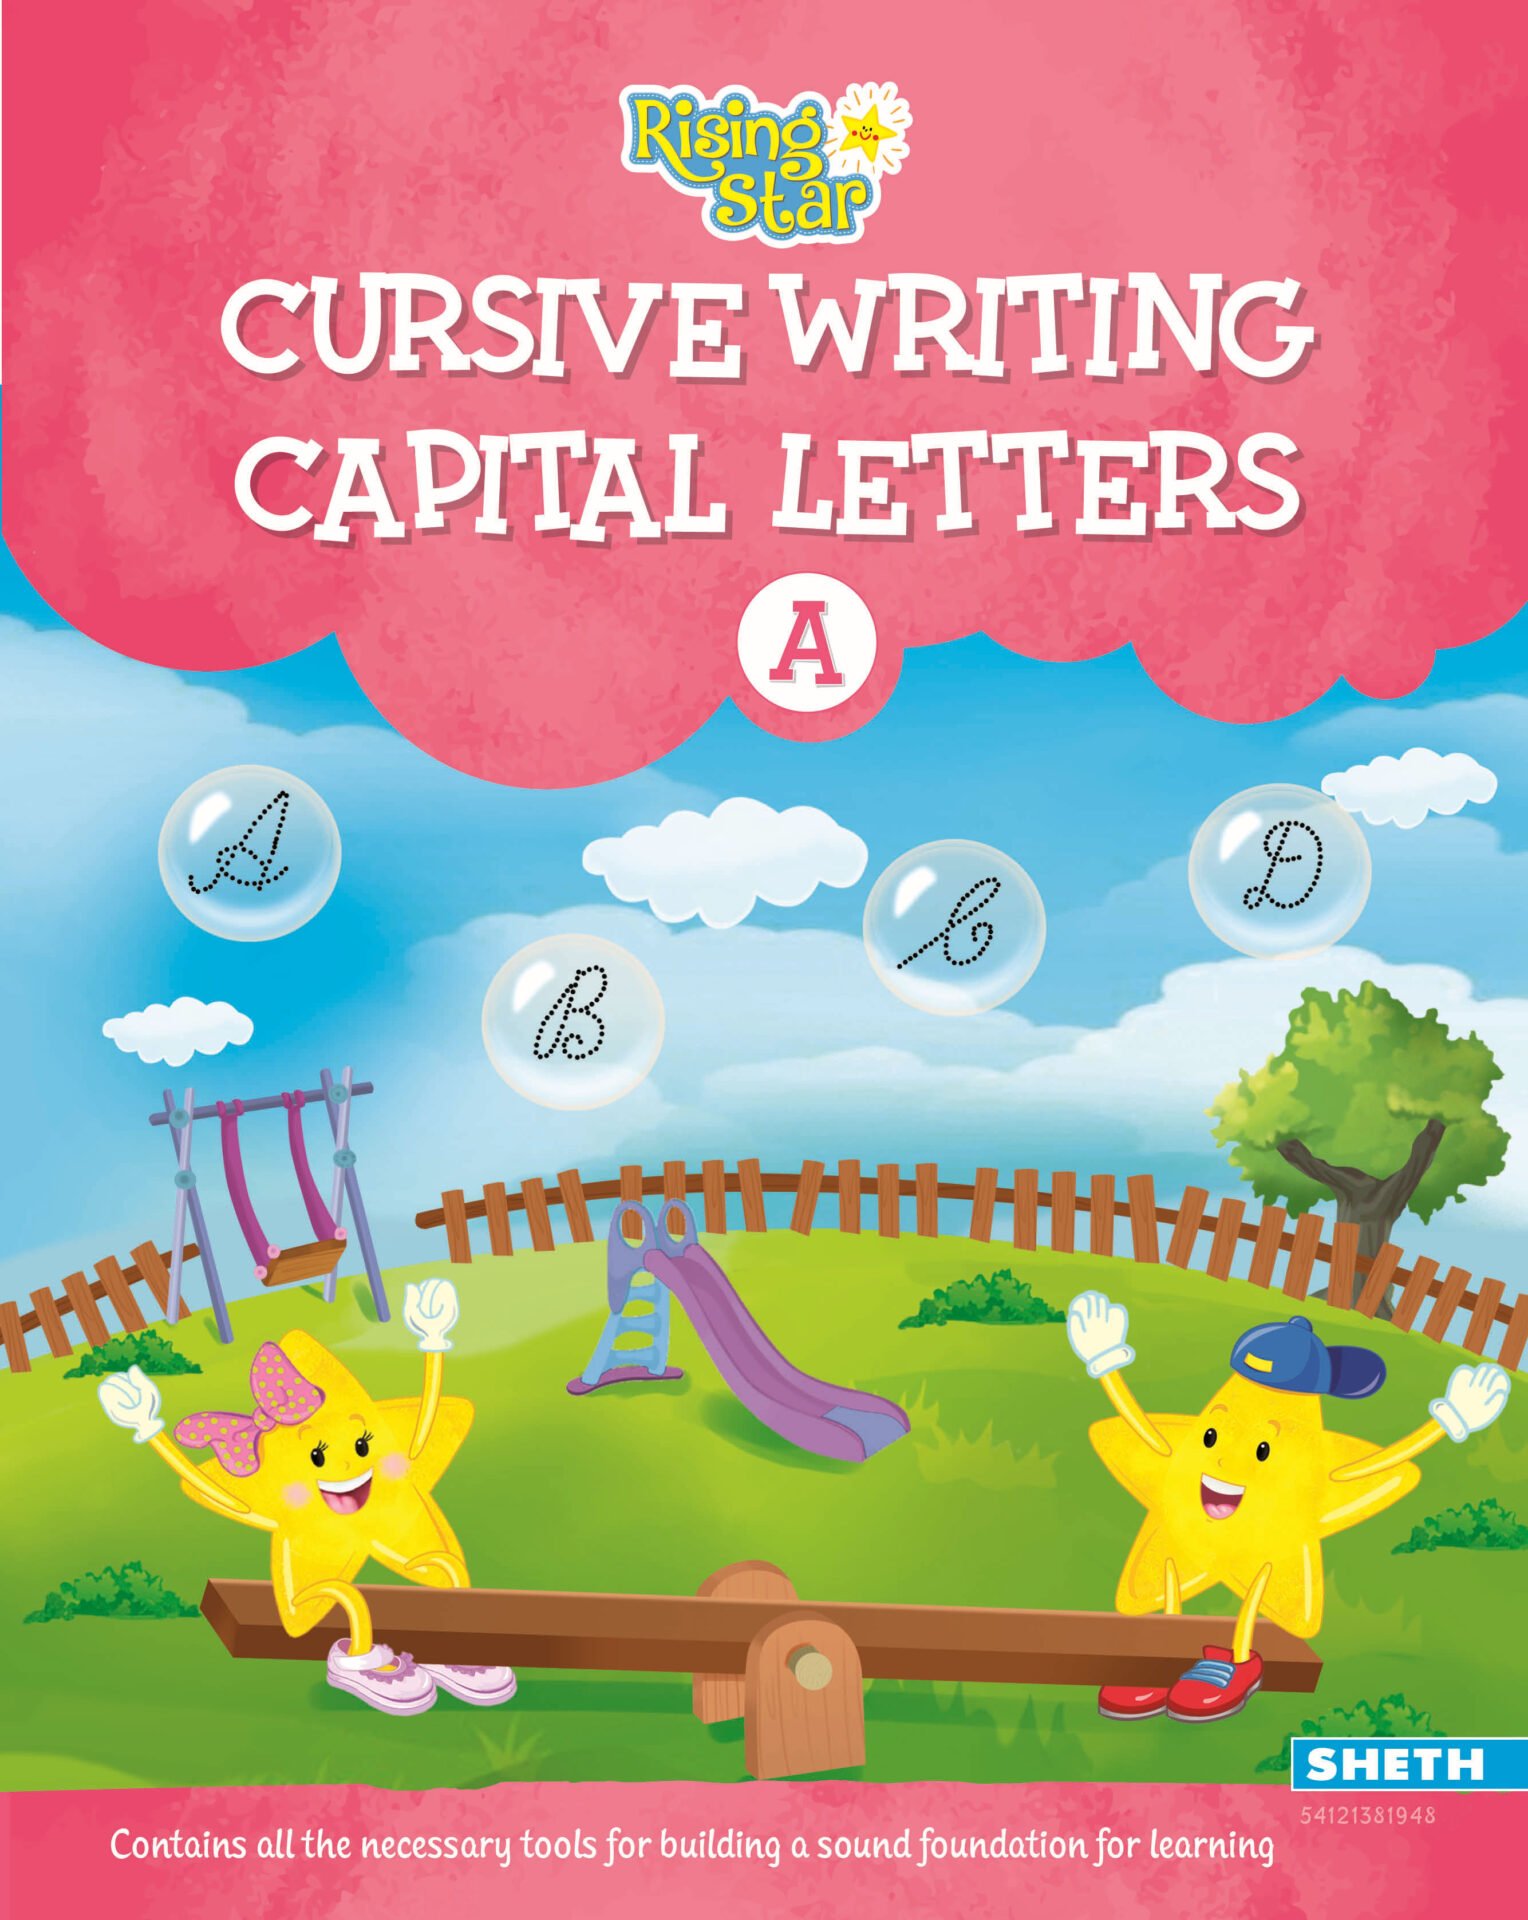 Rising Star Cursive Writing Capital Letters A 01 1